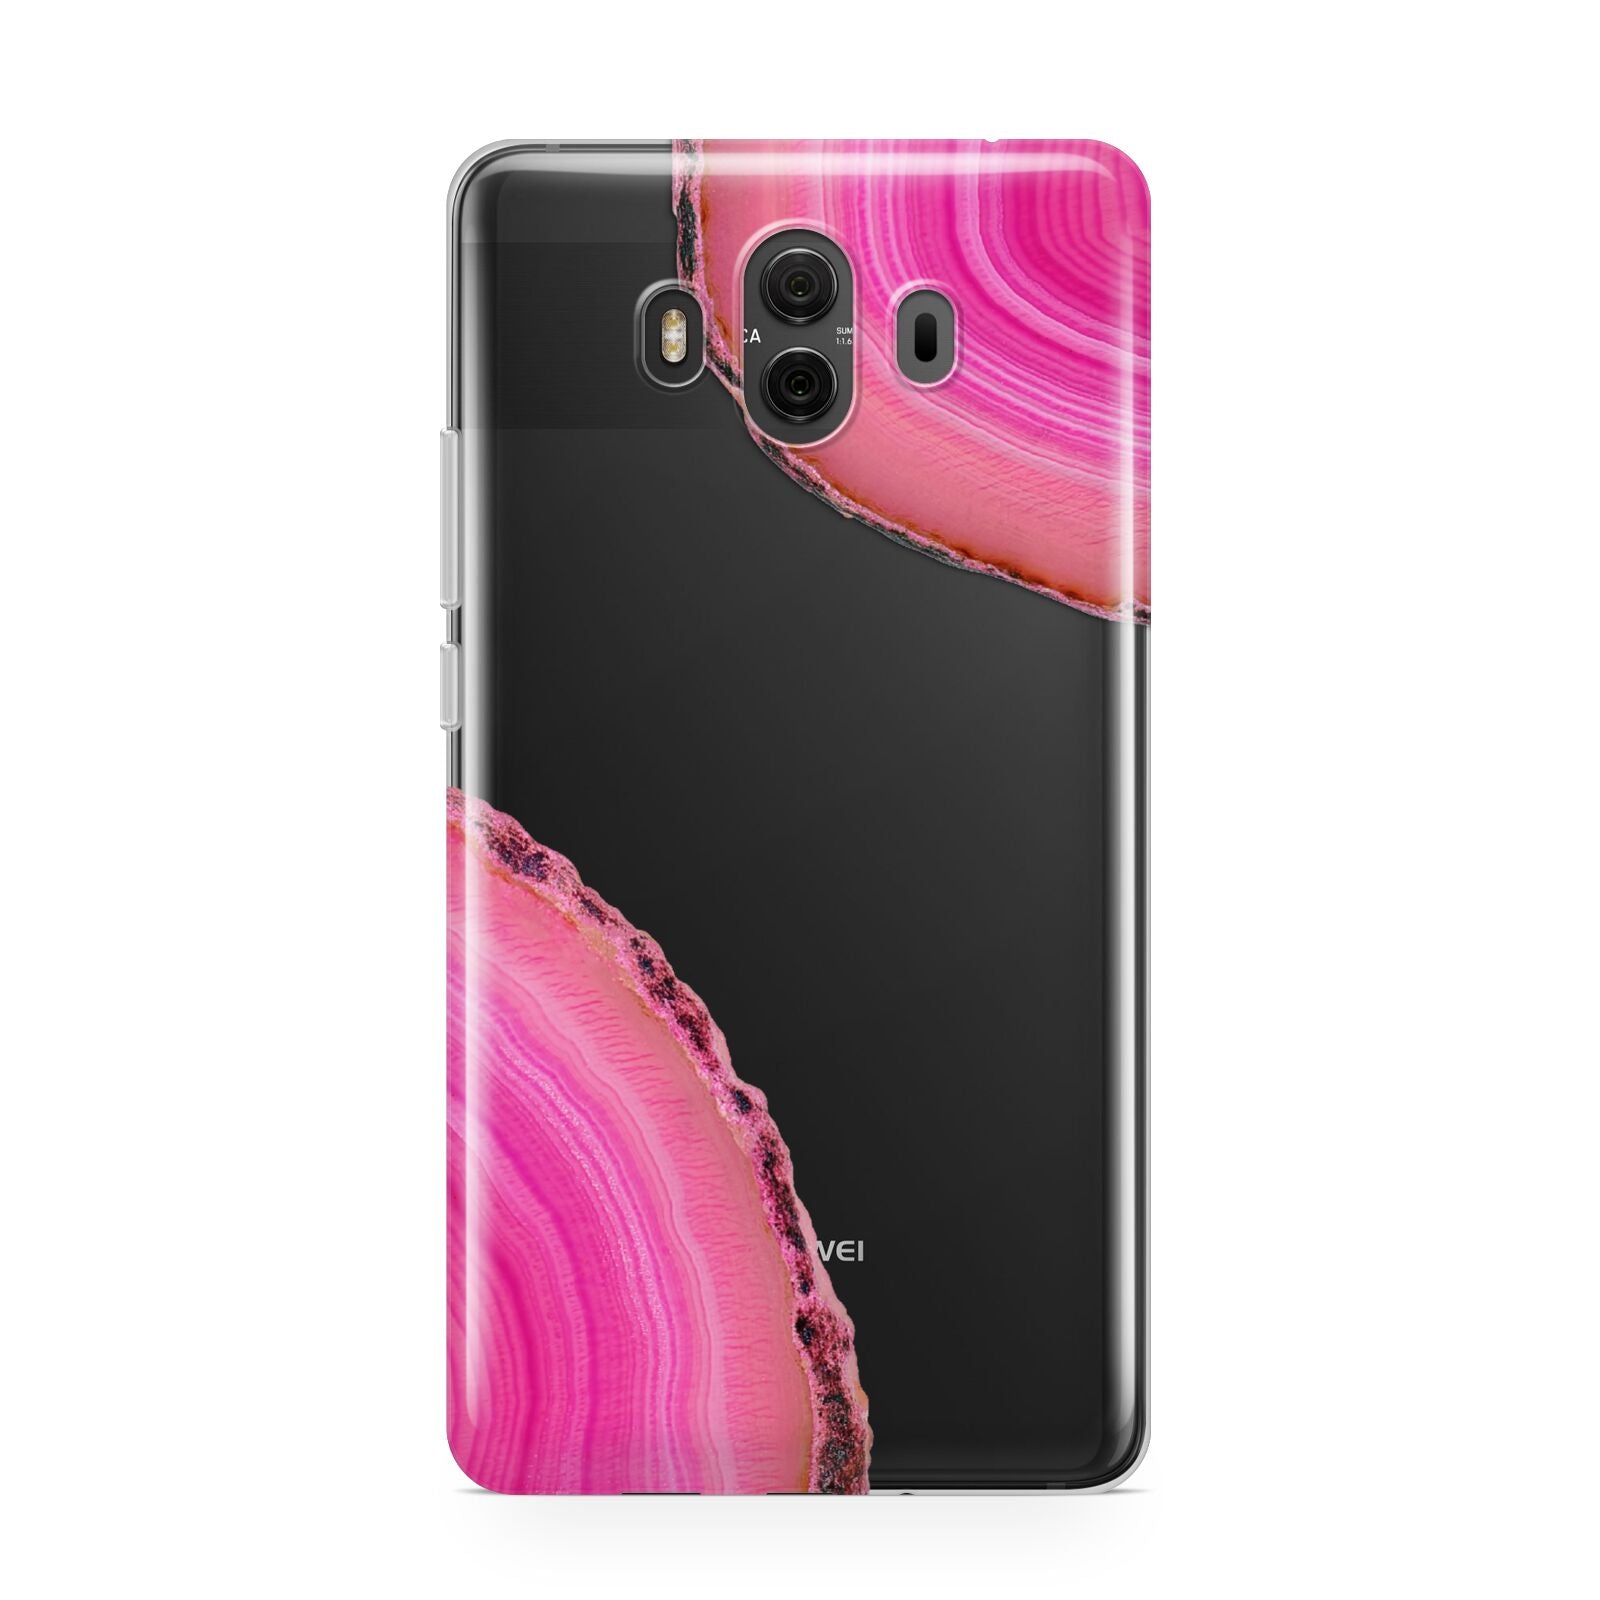 Agate Bright Pink Huawei Mate 10 Protective Phone Case